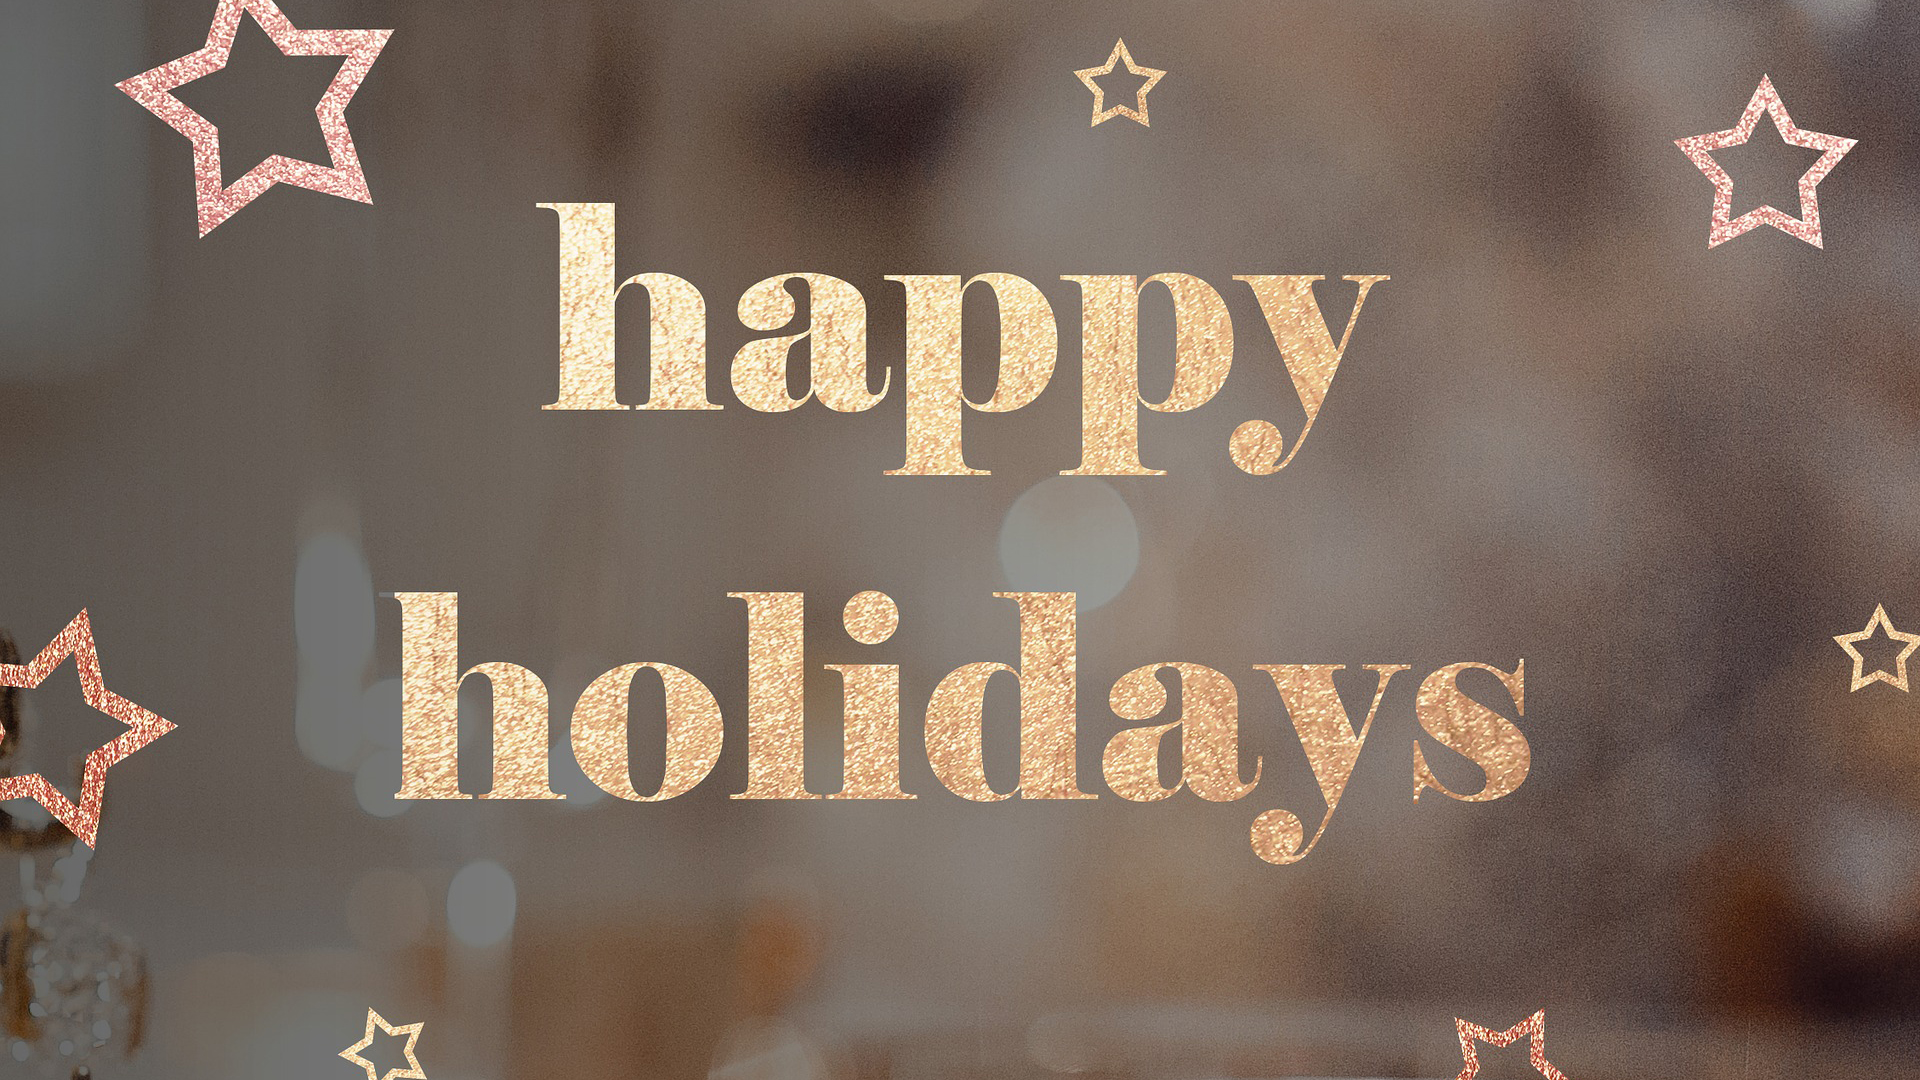 Shimmery Gold Happy Holidays Graphic with a blurred brown and gray background with small and large stars all around.